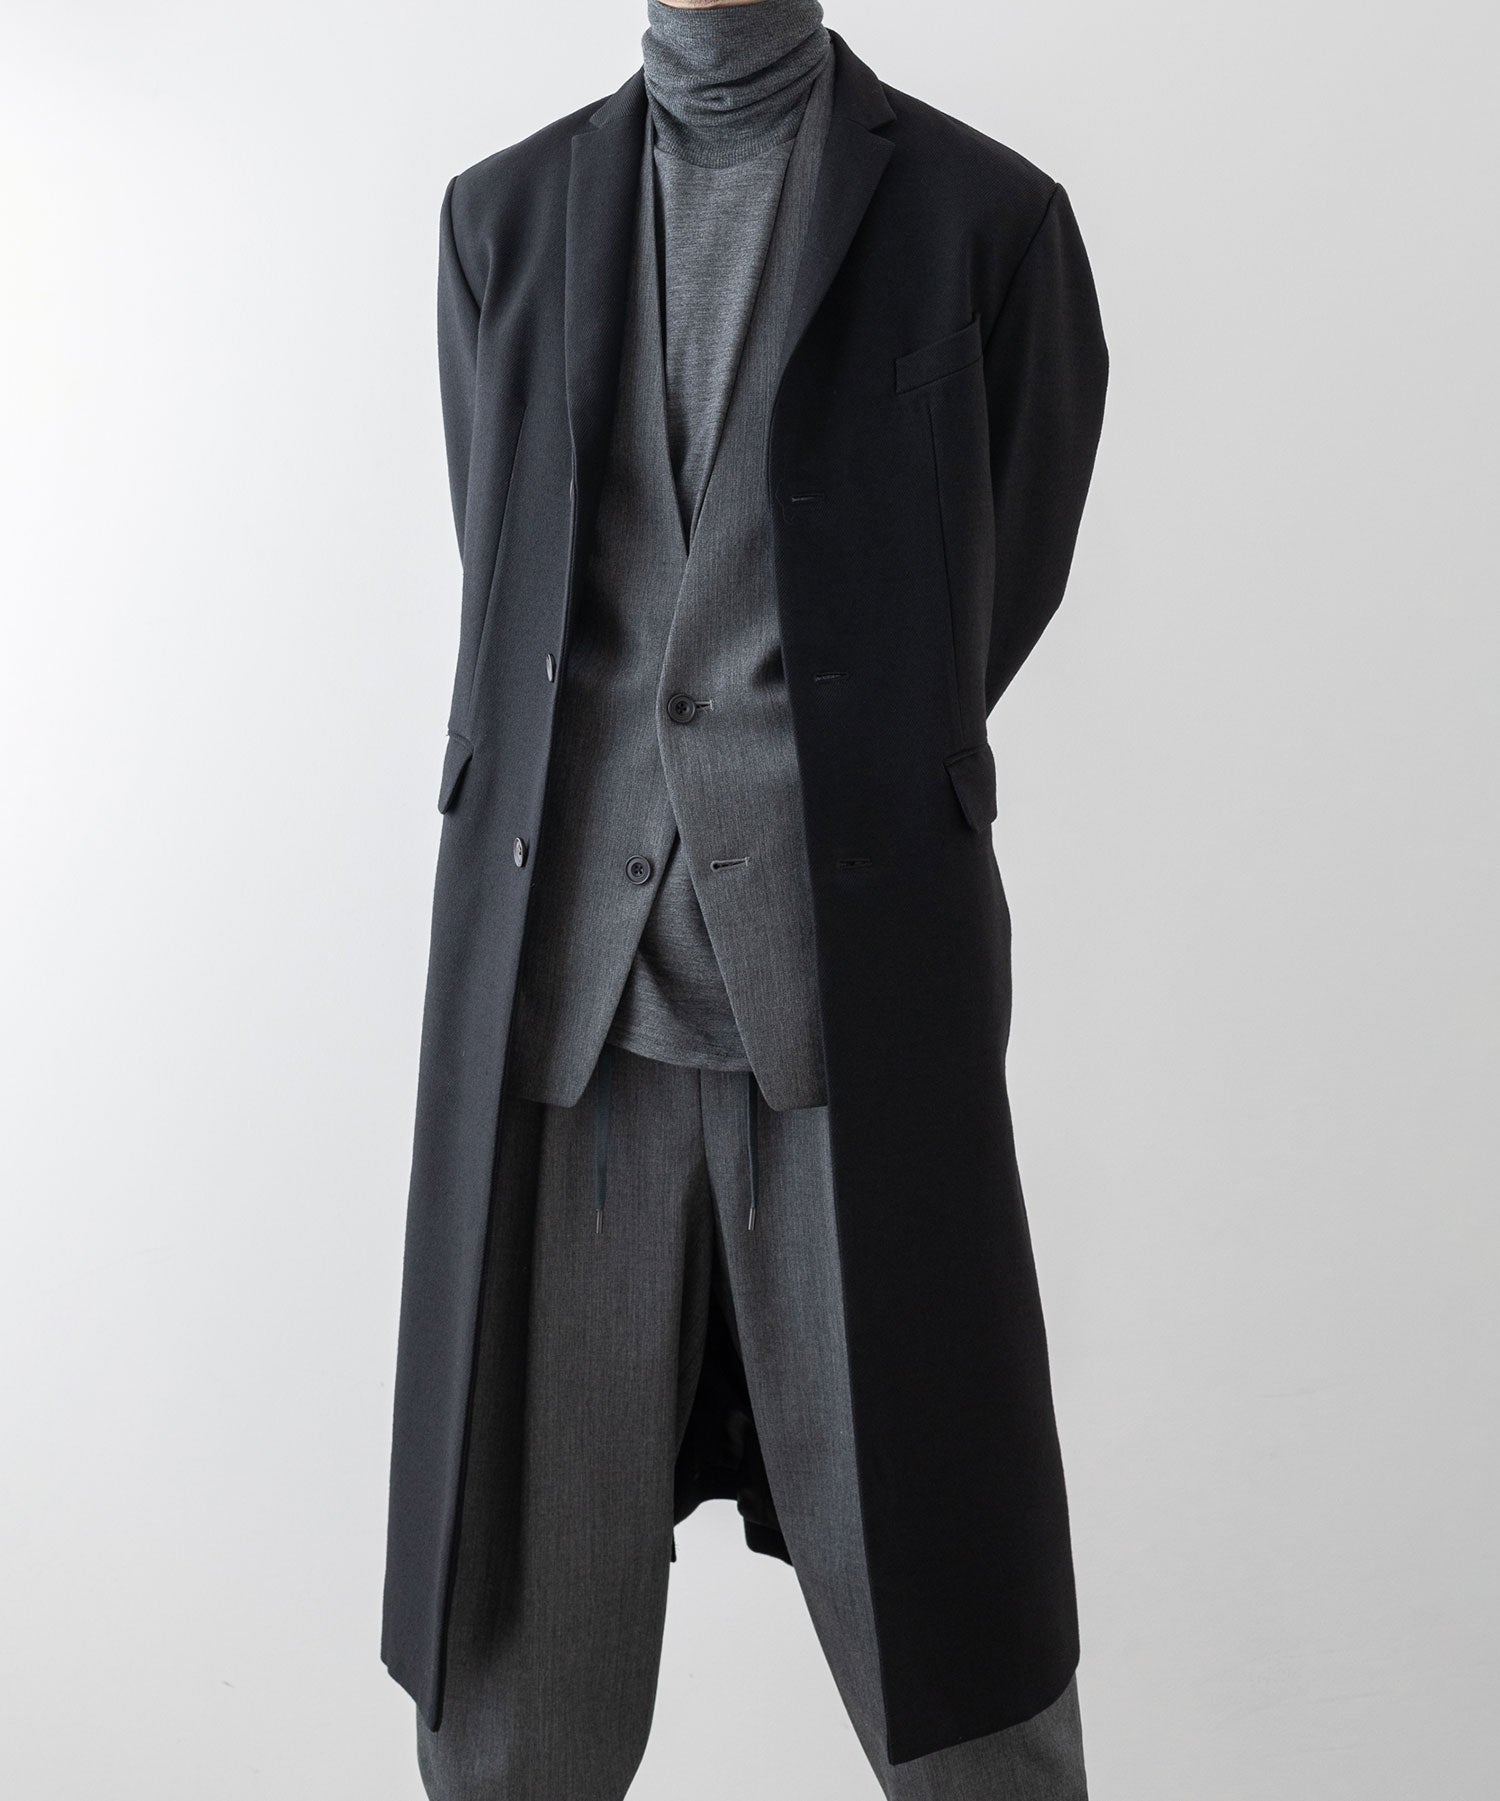 ato】WOOL TWILL NO COLLAR JACKET - CHARCOAL | 公式通販サイト